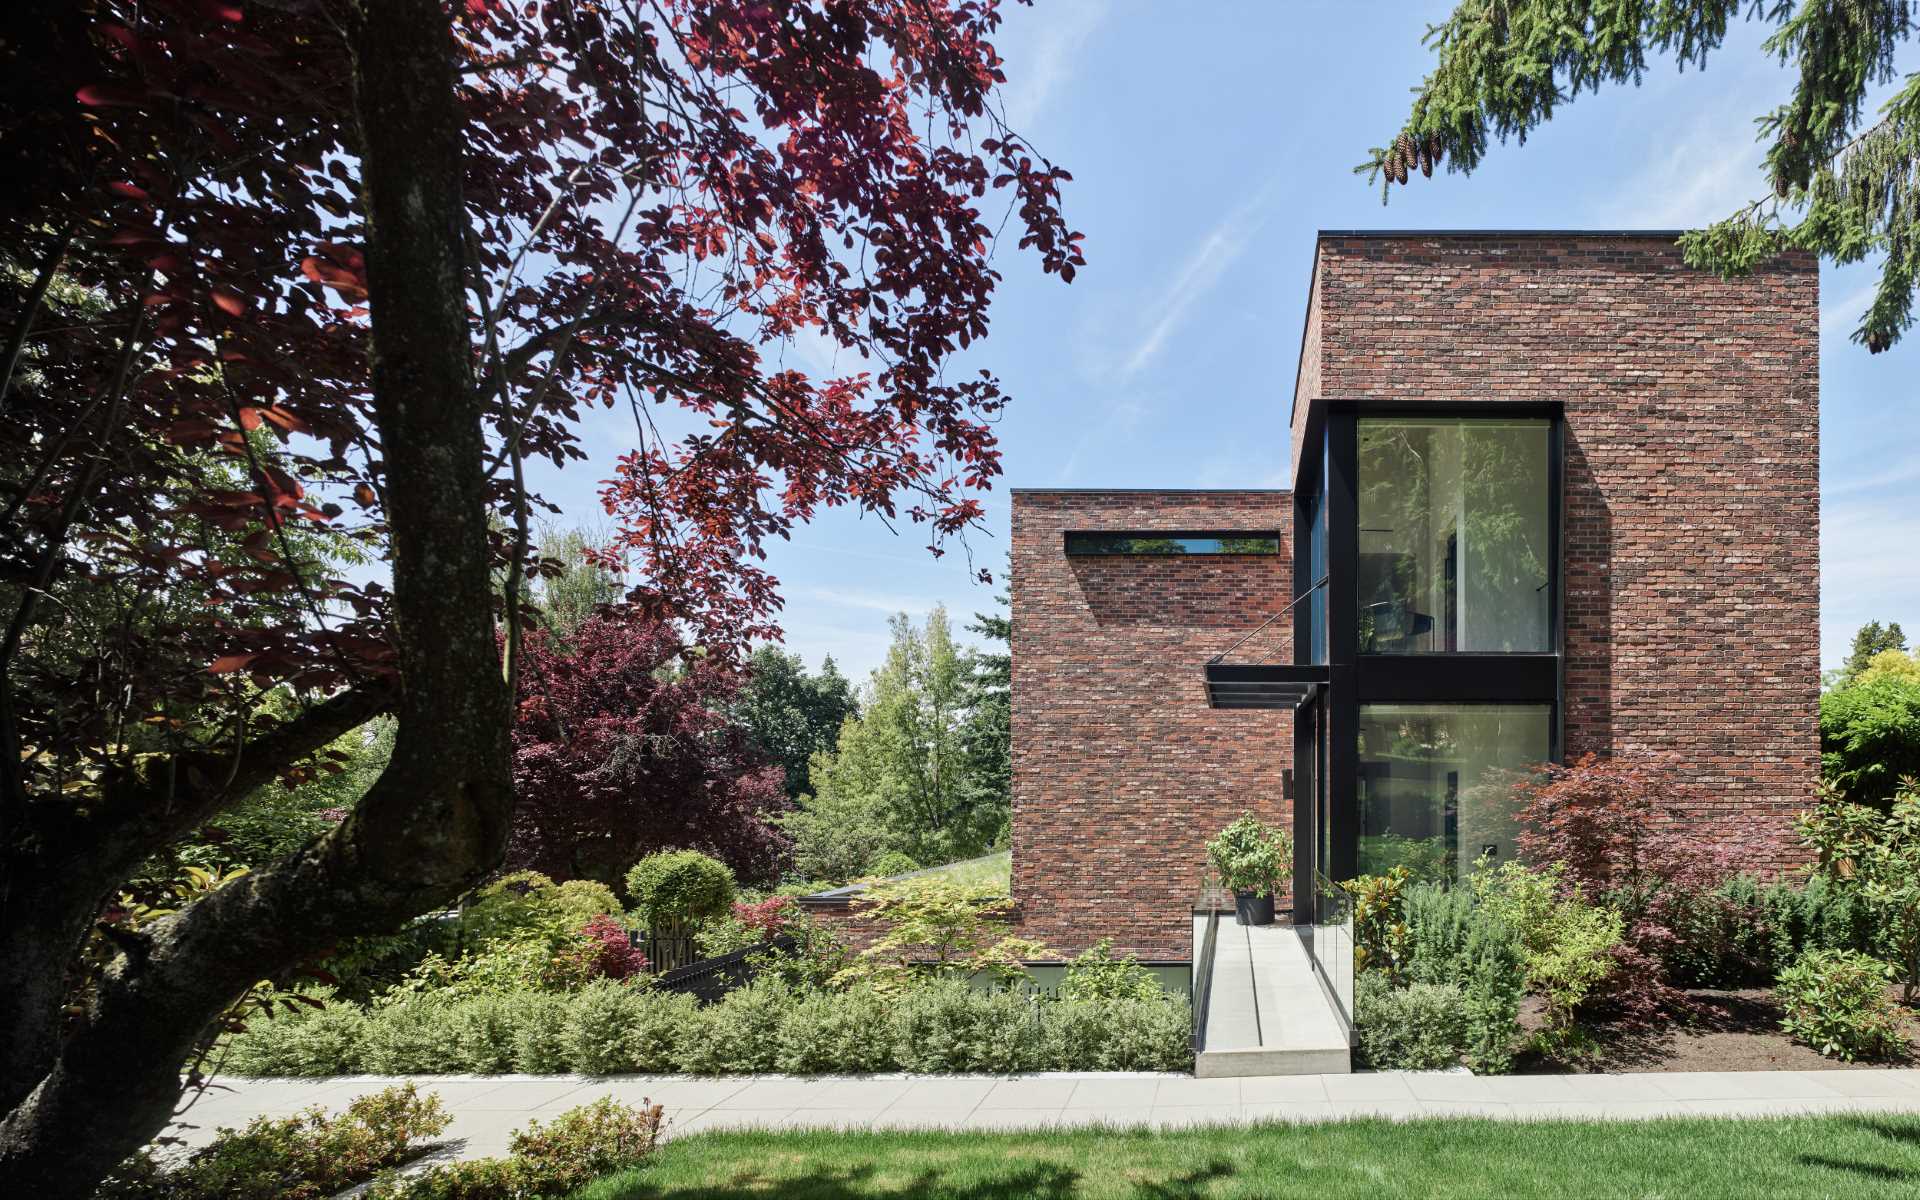 The front door of this modern brick house is accessed across a long steel bridge that floats above a sunken patio.